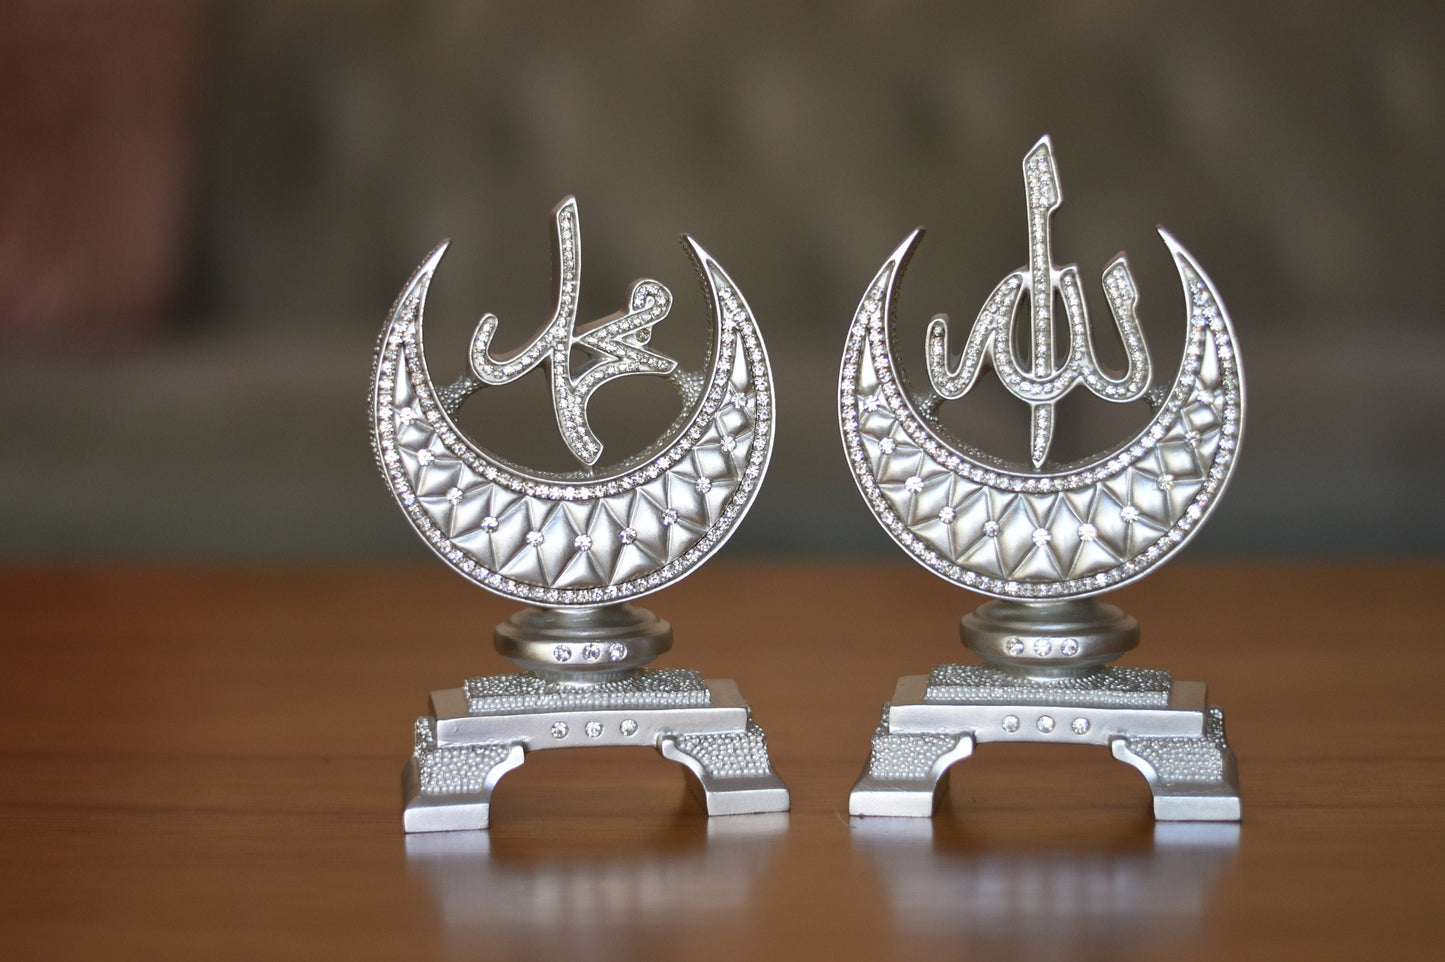 Crystal Embellished Allah (SWT) and Muhammad (PBUH) Set. Centerpiece, Mantle, Office Decor from Turkey MINI